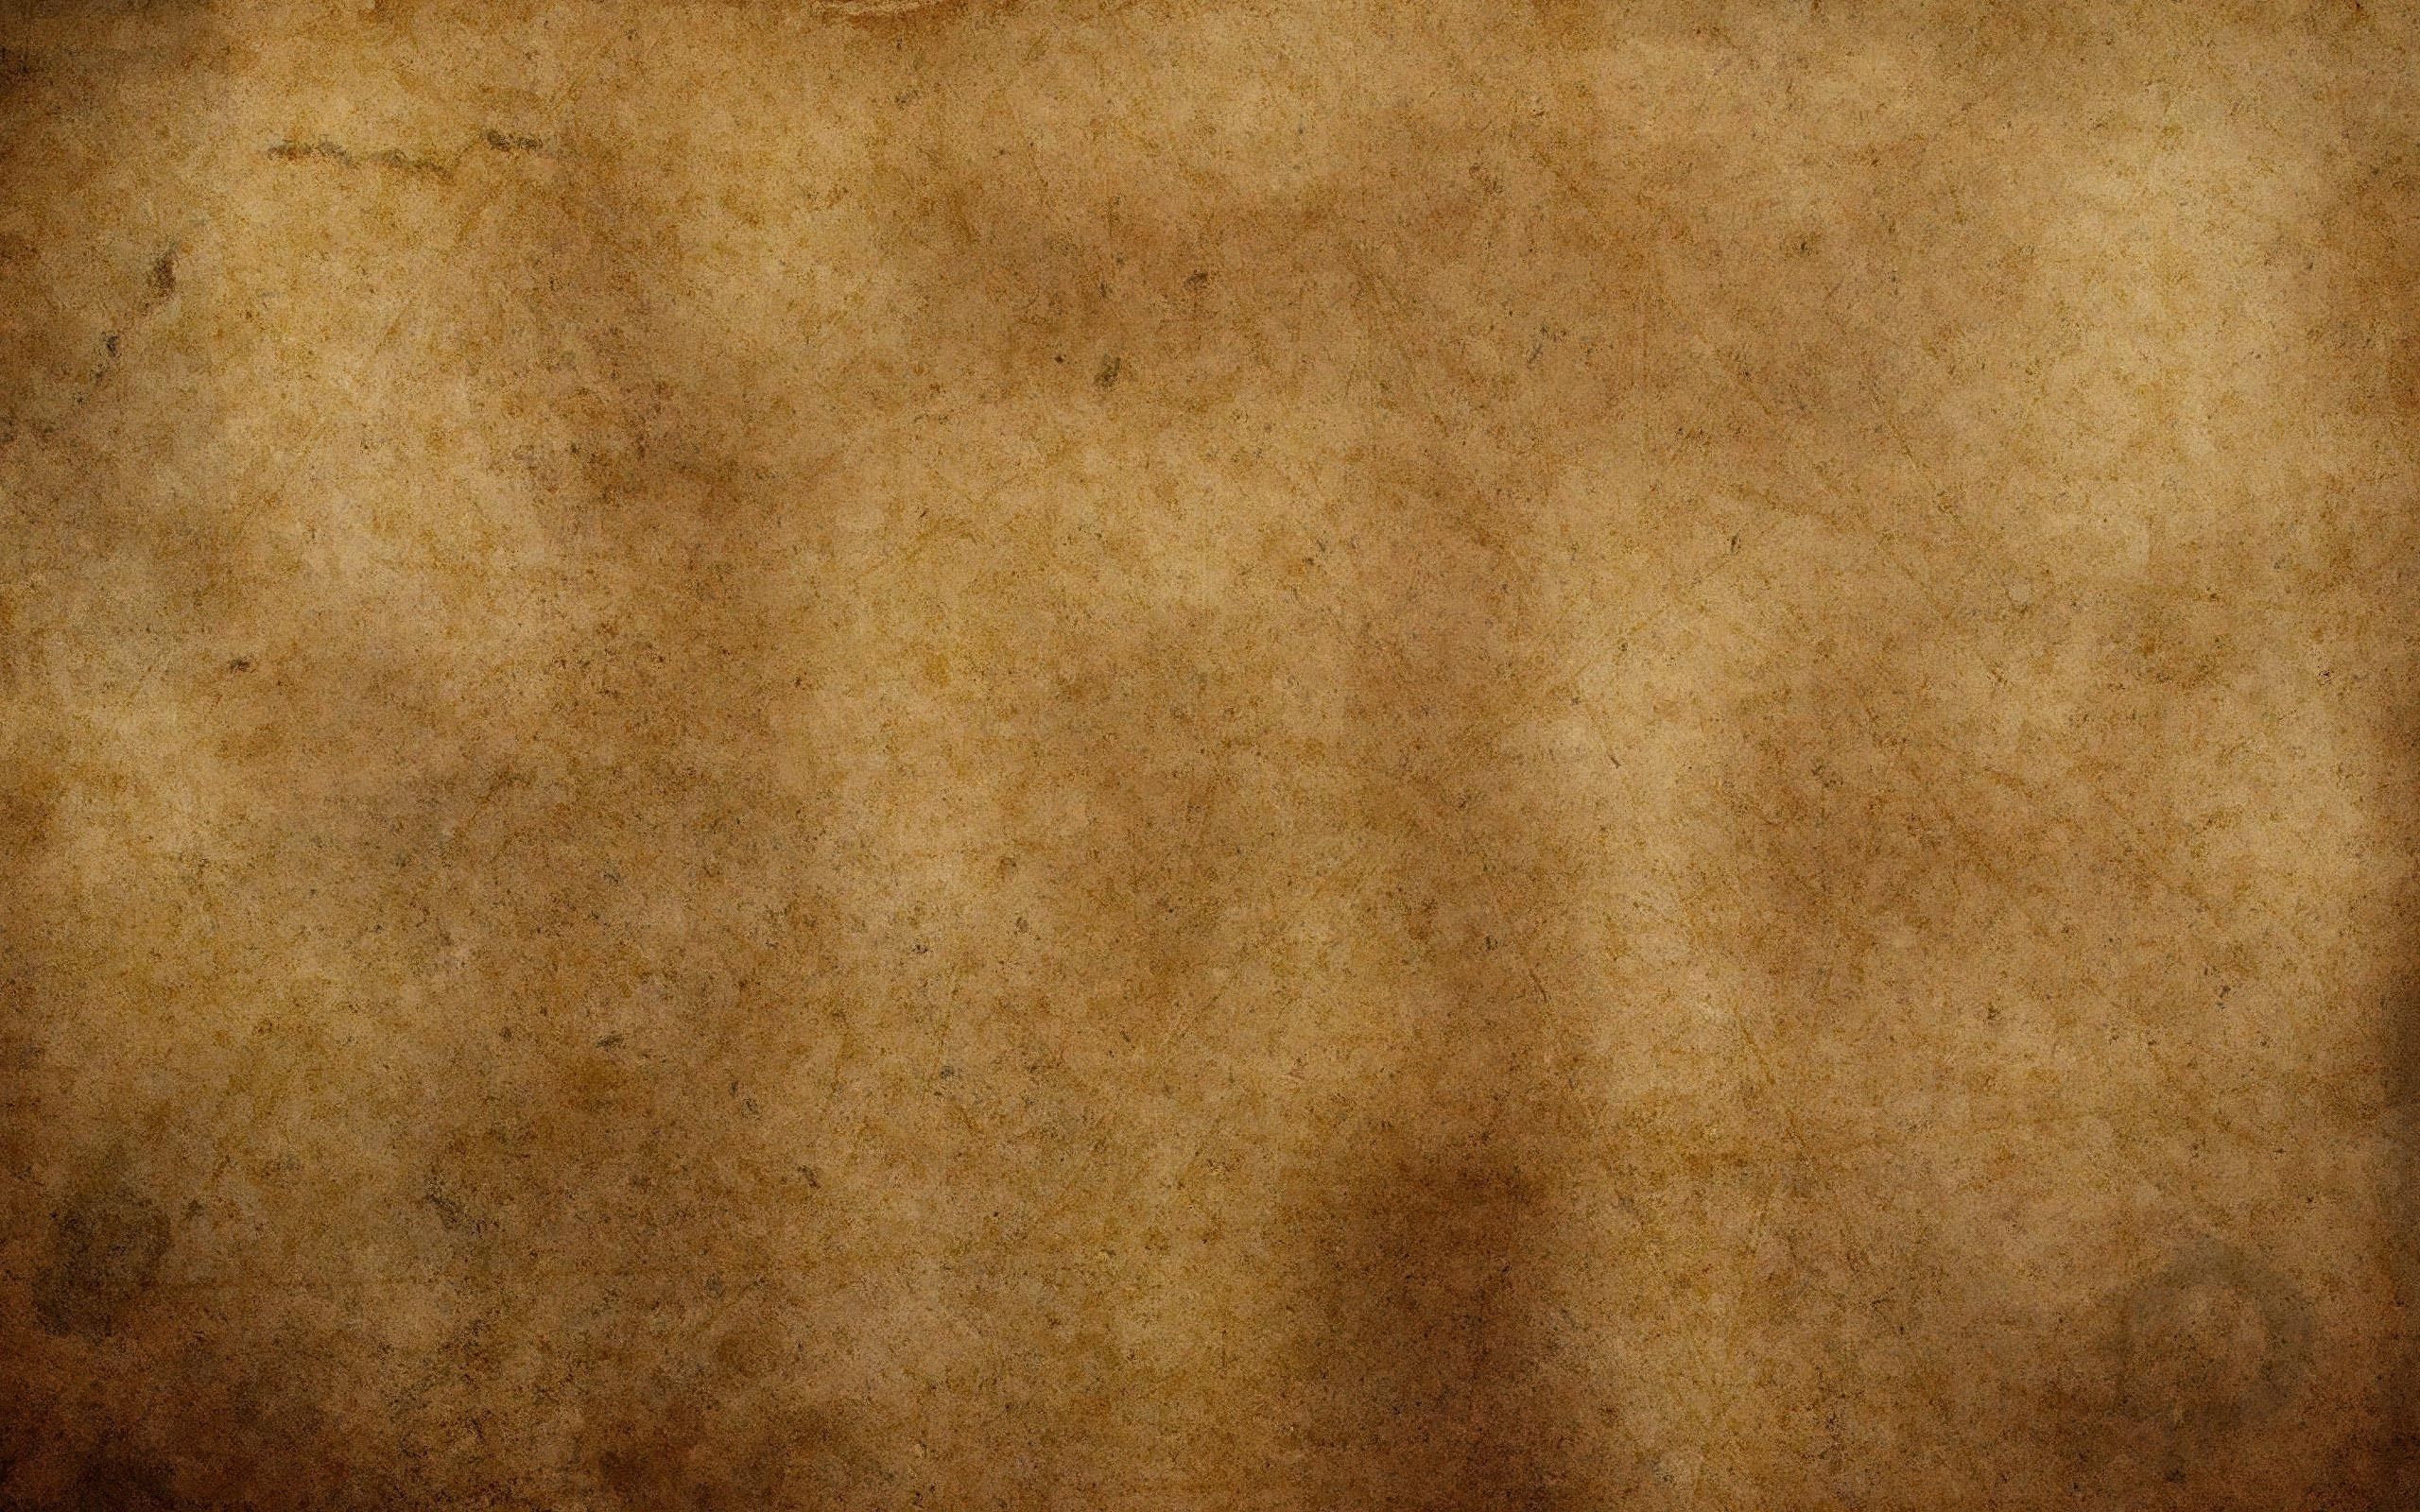 old, paper, spots, surface, textures, texture, background, stains